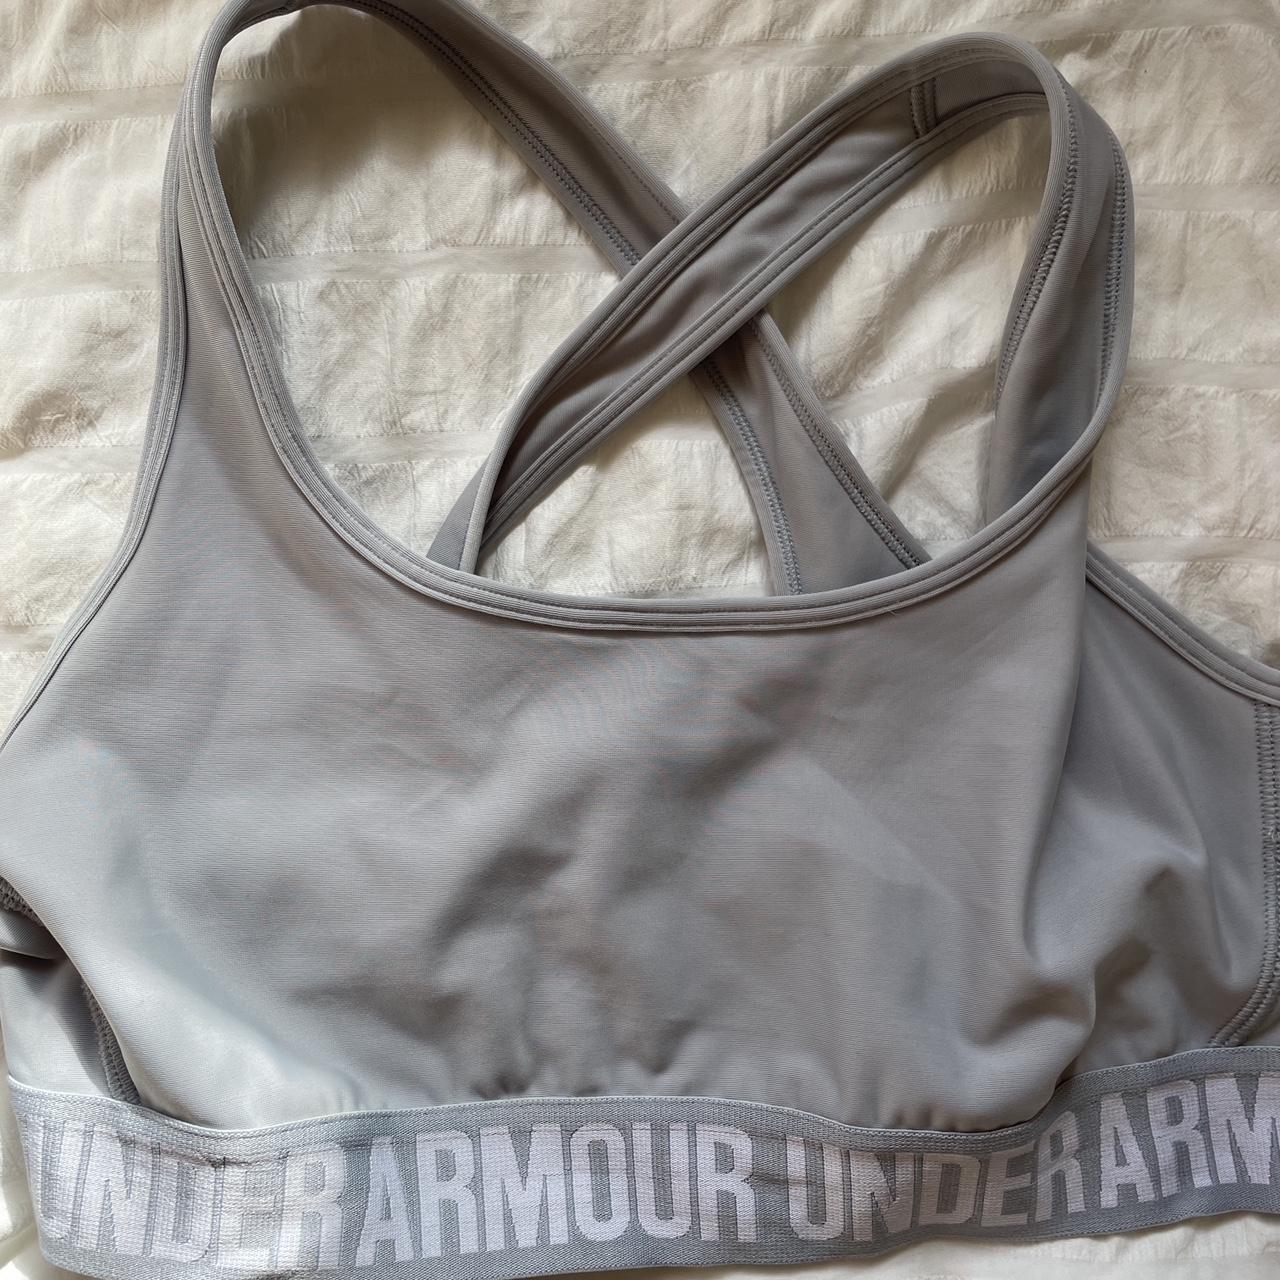 Under armour bra size small No size tag see - Depop